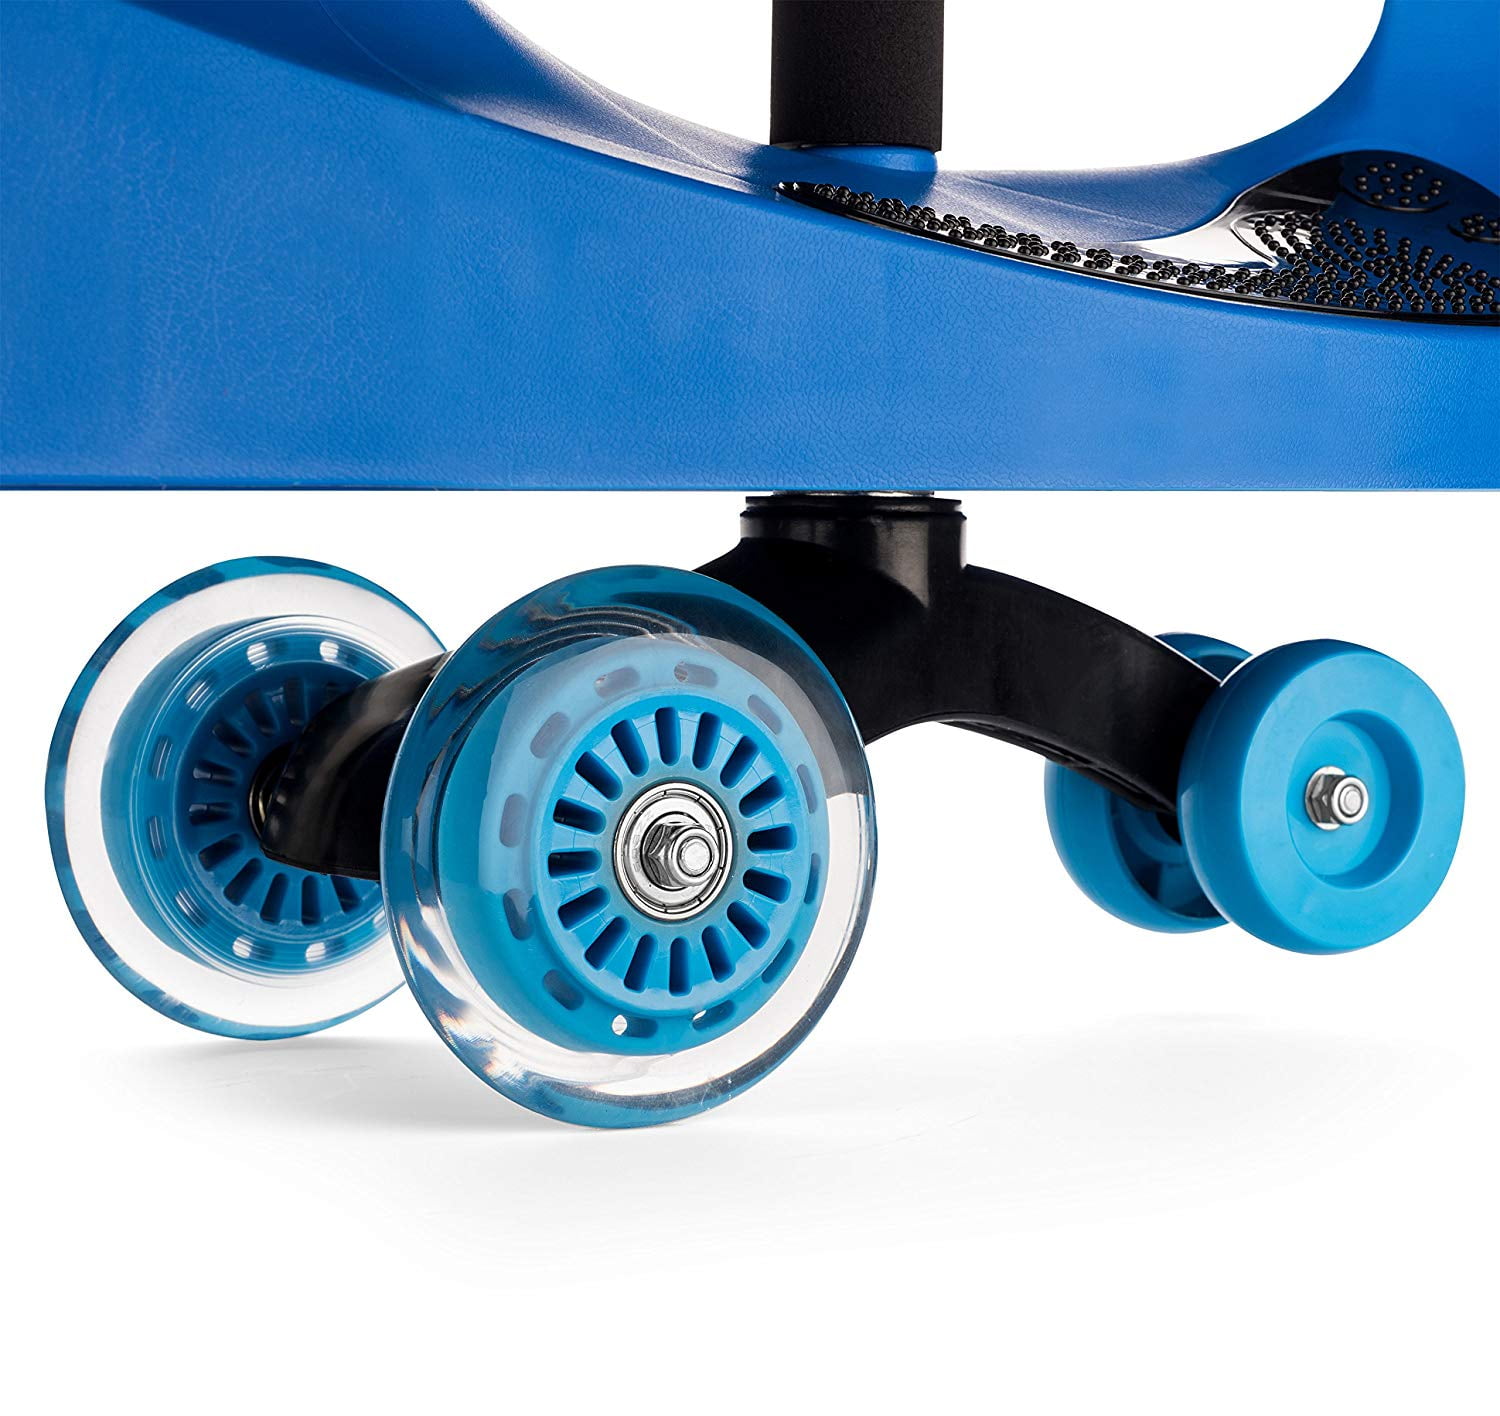 Ages 3 Yrs and up Polyurethane PU Wheels Blue PlasmaCar The Original by PlaSmart Inc Ride on Toy 